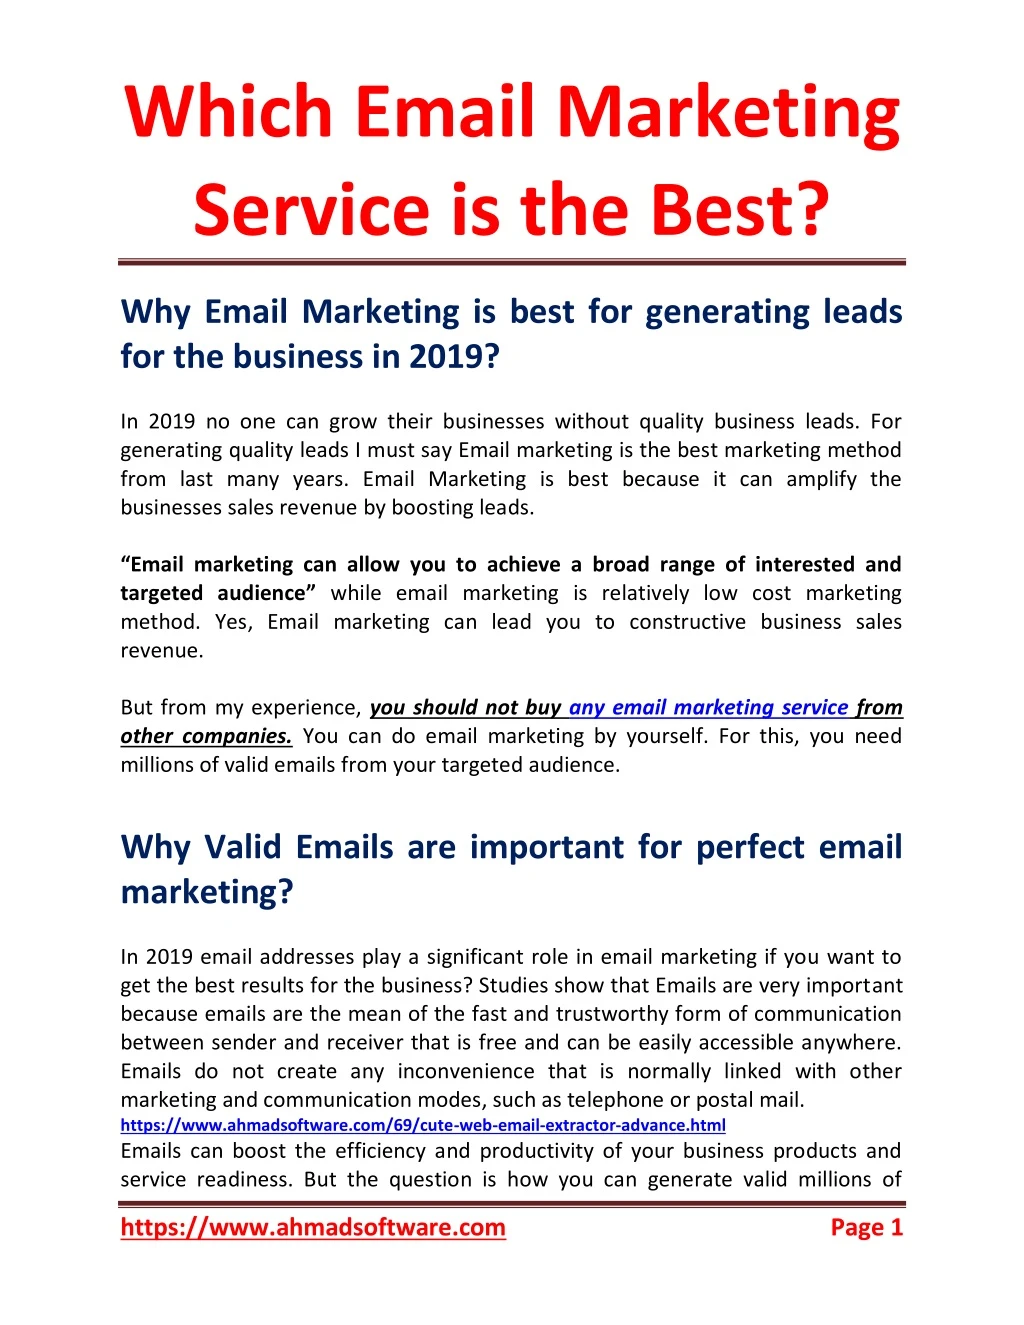 which email marketing service is the best